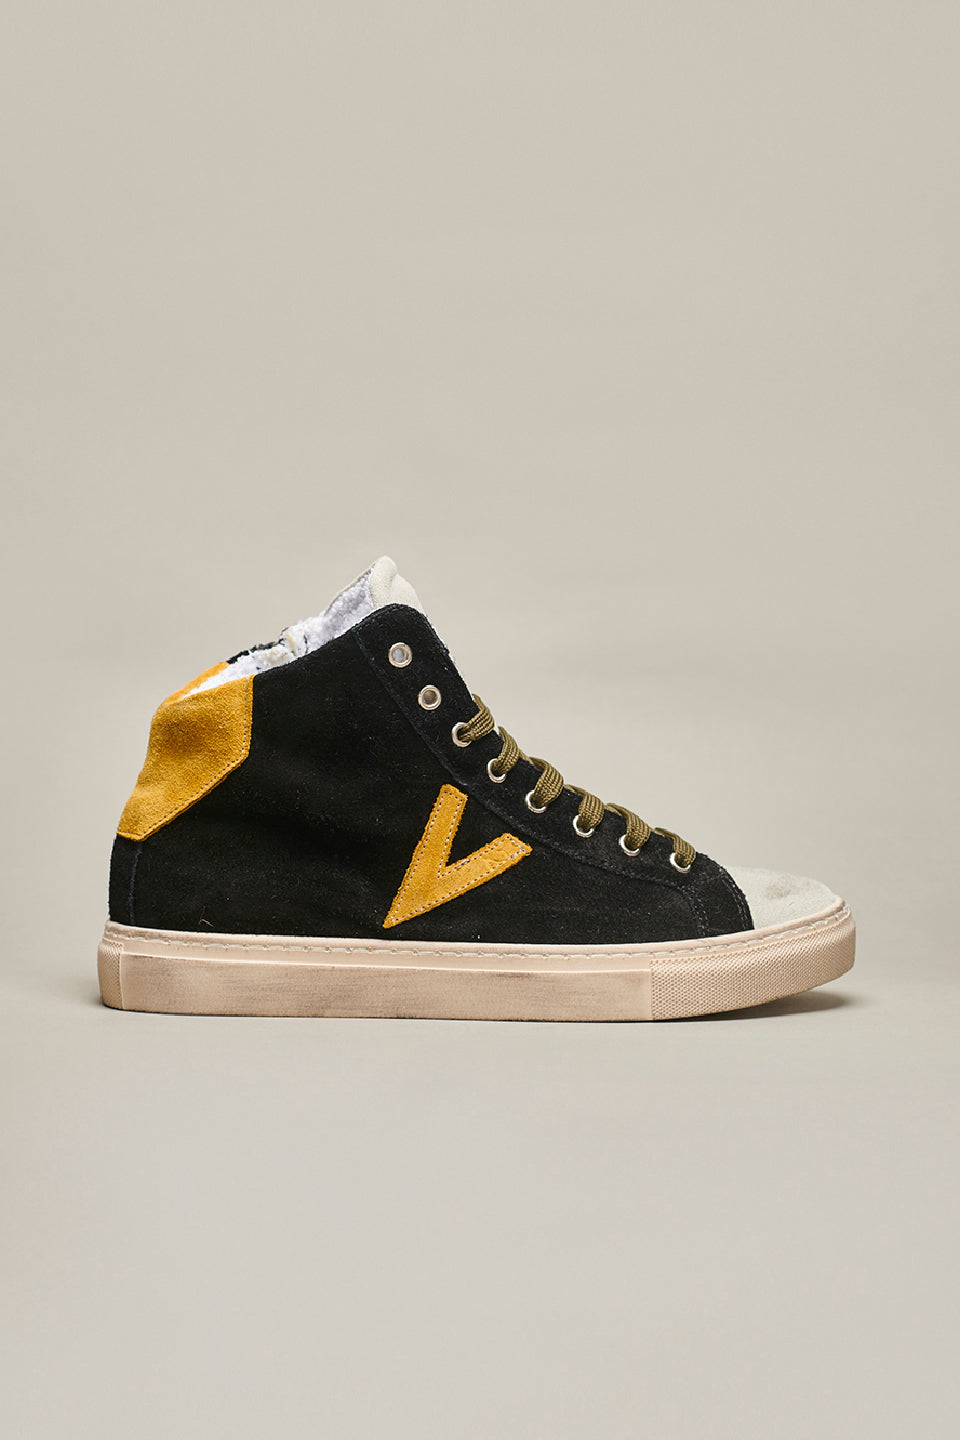 OLYMPIC MID- Black high sneakers with Mustard back and insert